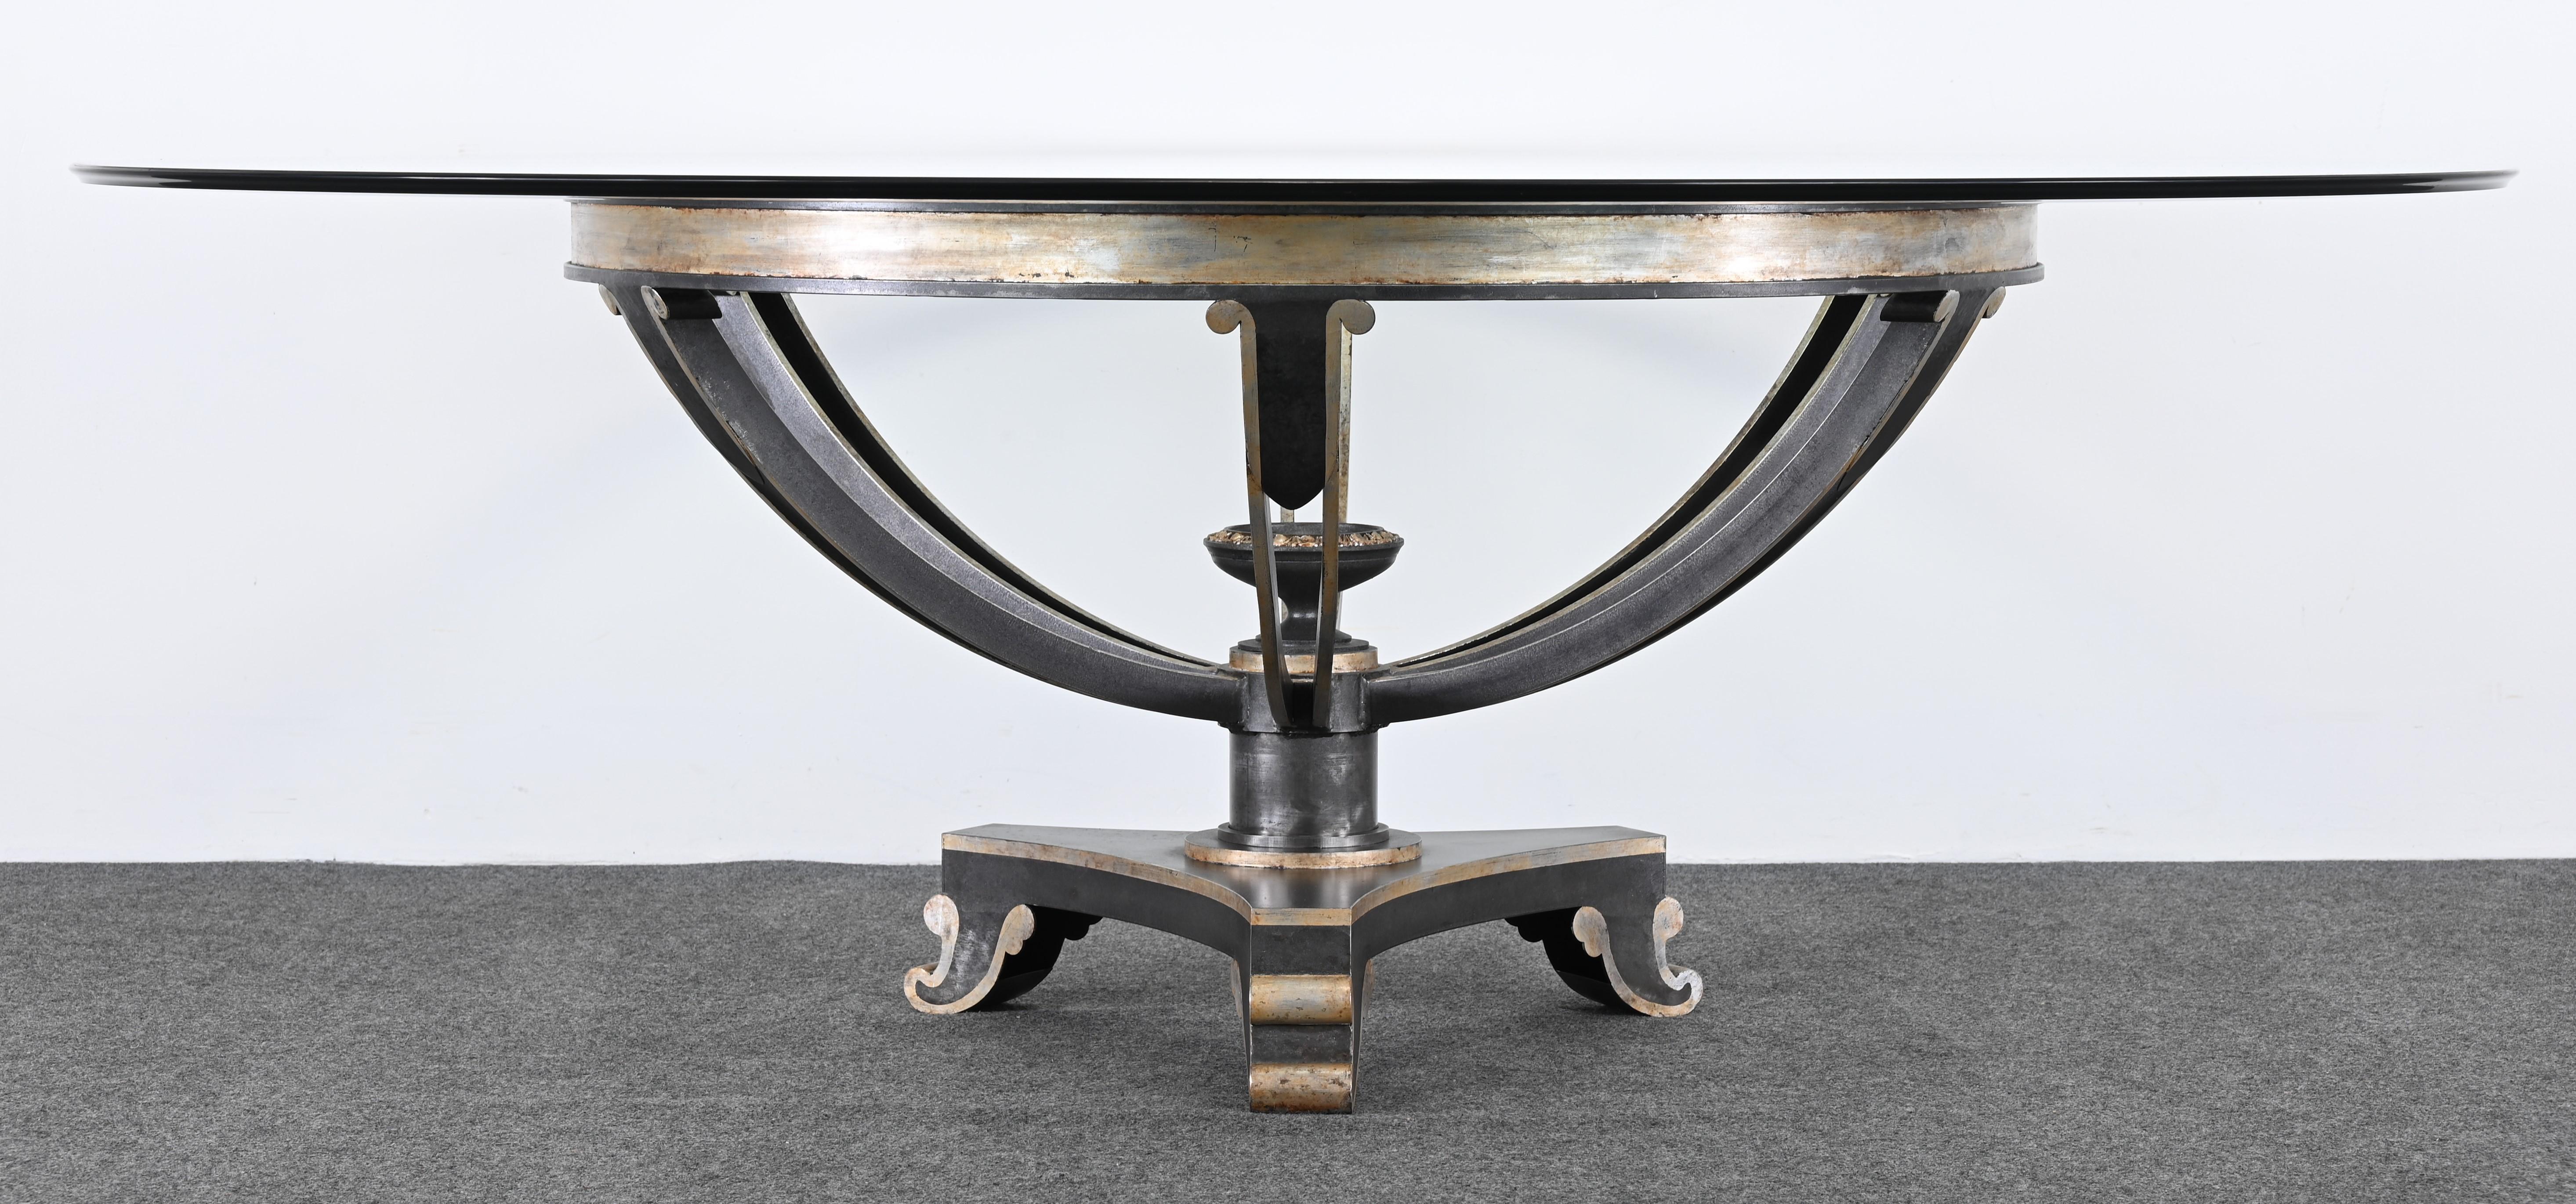 A monumental center table or dining table crafted by Niermann Weeks renowned for unique craftsmanship and bespoke design. This magnificent table came out of a well-known art collector's residence. The table is custom designed and made of cast iron